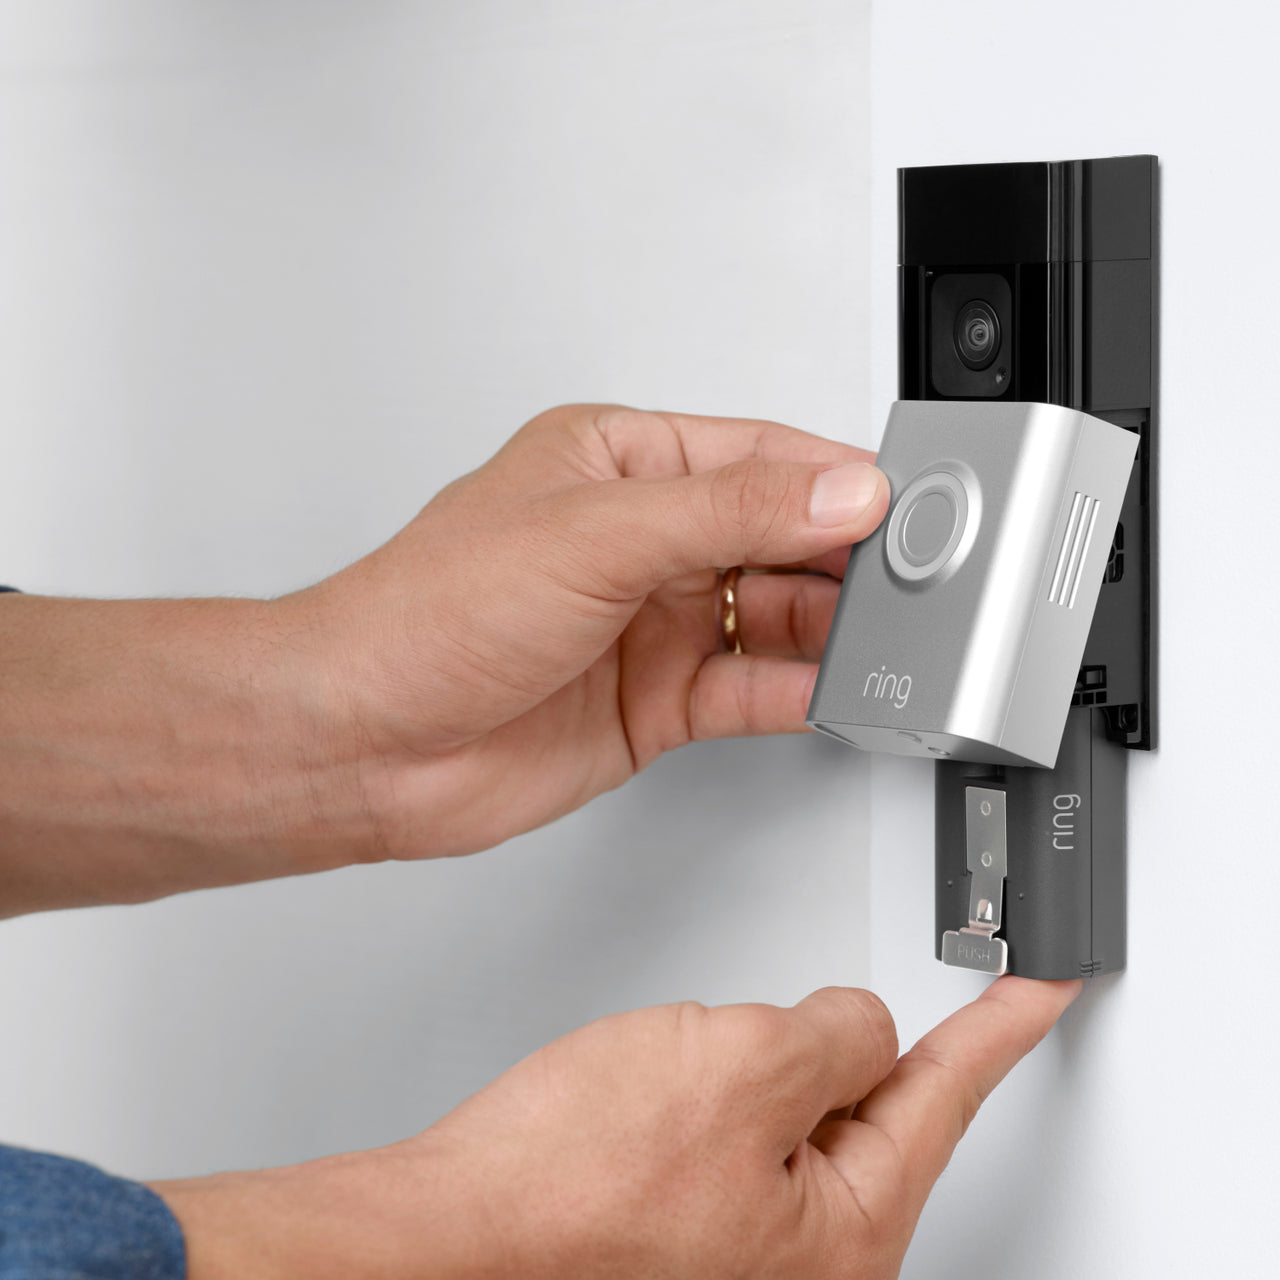 products/ring_battery_doorbell_plus_ots_feature_3_1500x1500_1_0897401c-8807-4580-ad48-249503f4c049.jpg